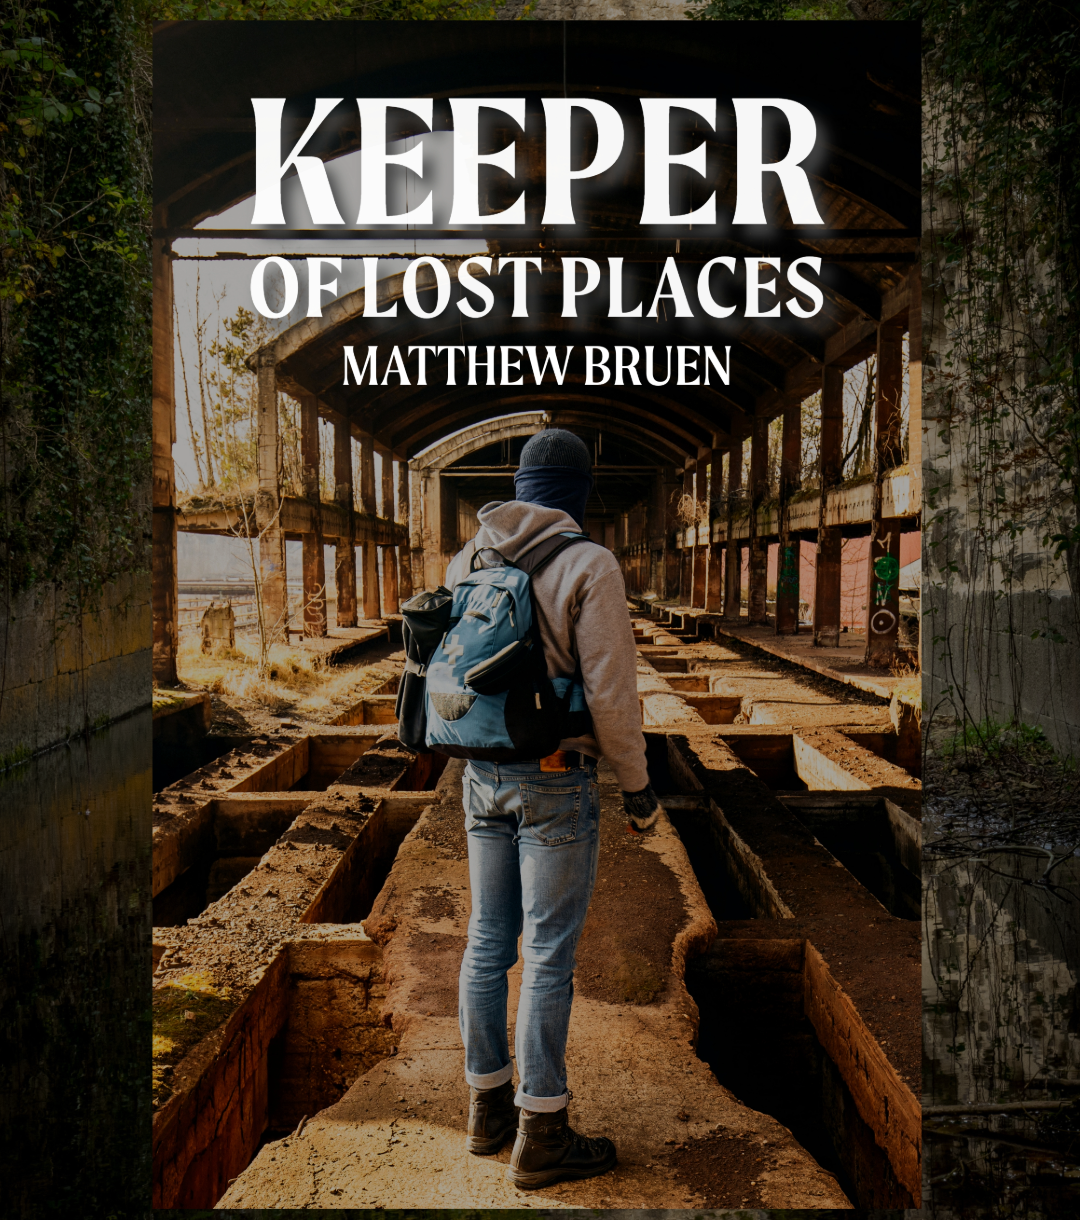 Special Offer! - Keeper of Lost Places by Matthew Bruen - Signed Paperback